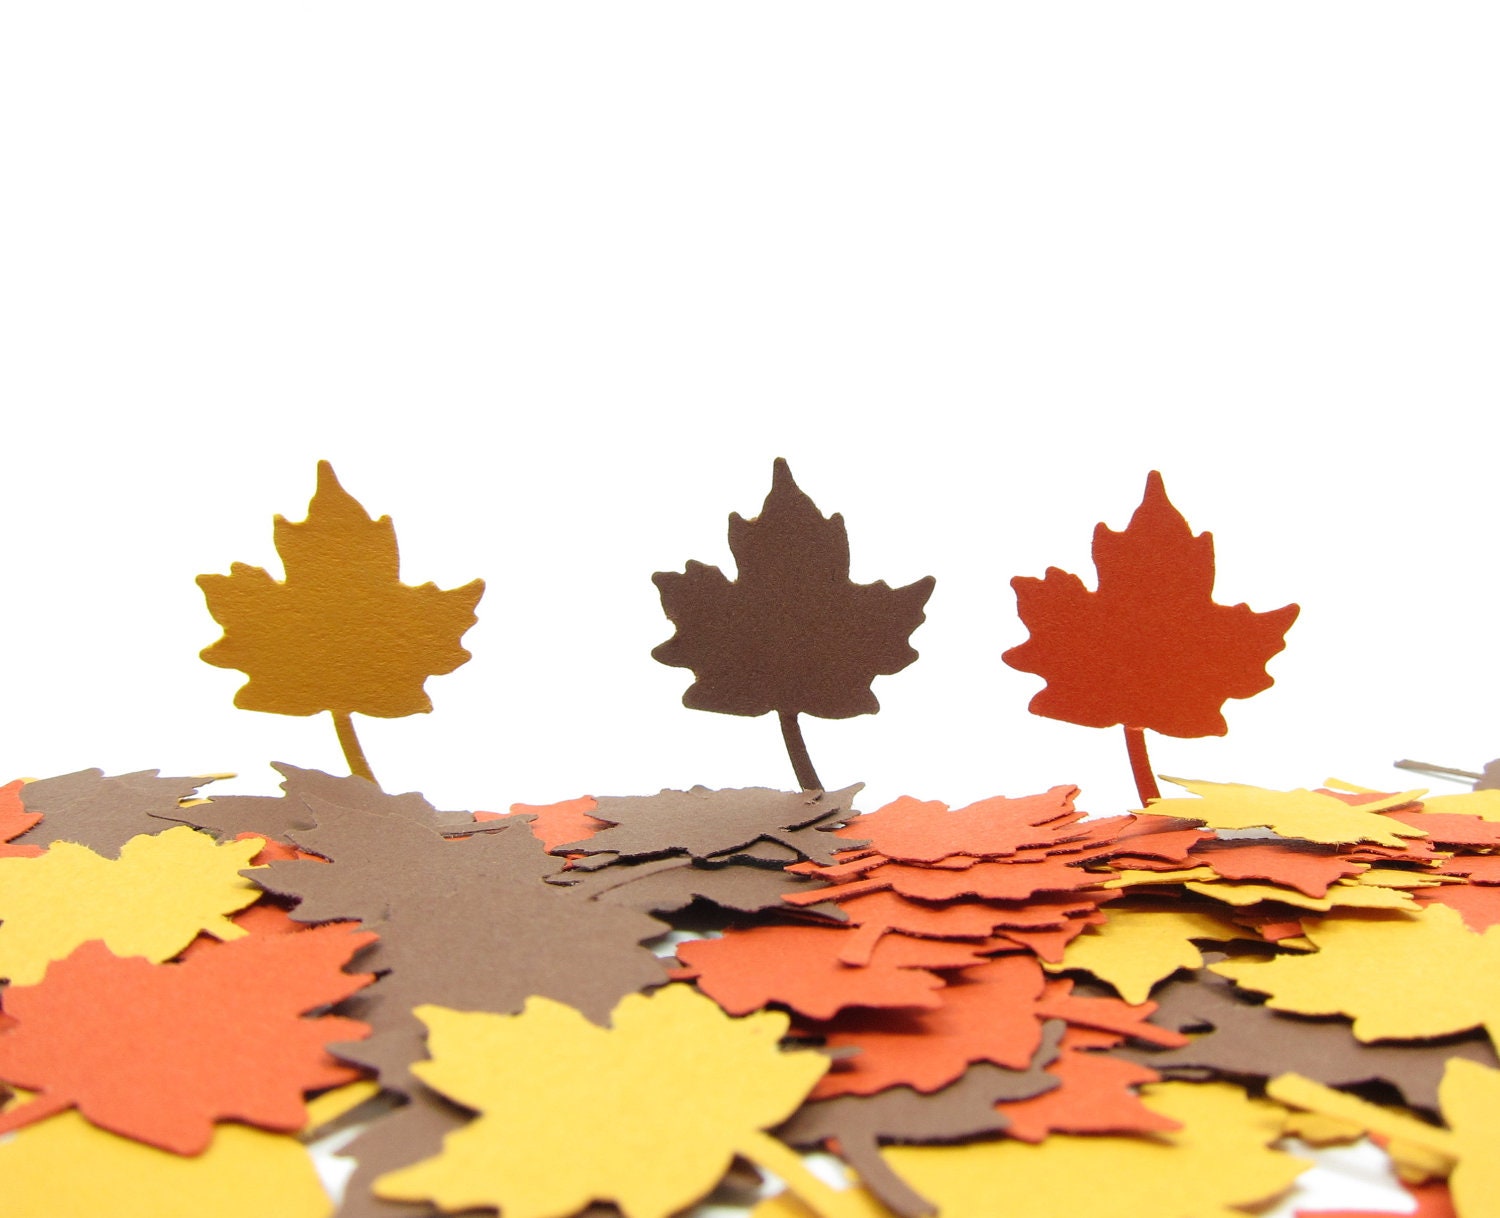 Autumn Leaves Confetti Large Maple Leaf Paper Punches in Orange Brown & Yellow - BrownEyedRose